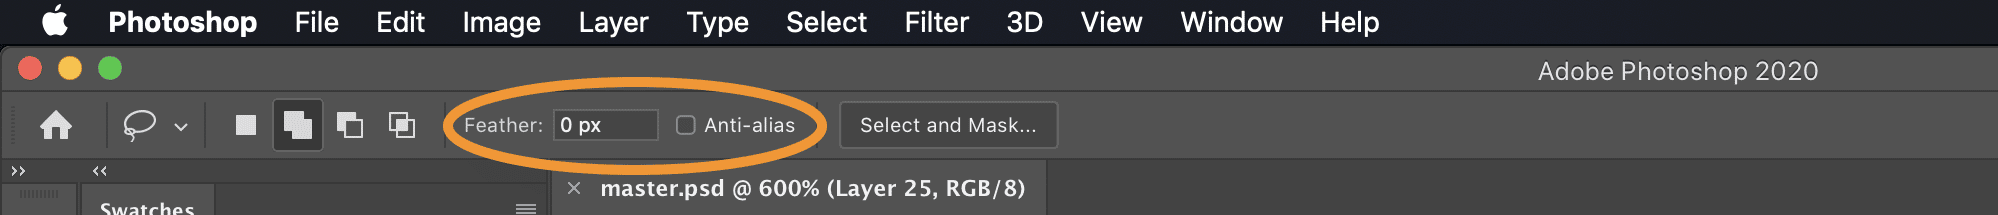 The lasso tool will make a fuzzy selection by default. Set "Feather" to 0px and untick the "Anti-alias" checkbox to get a pixel-perfect selection.